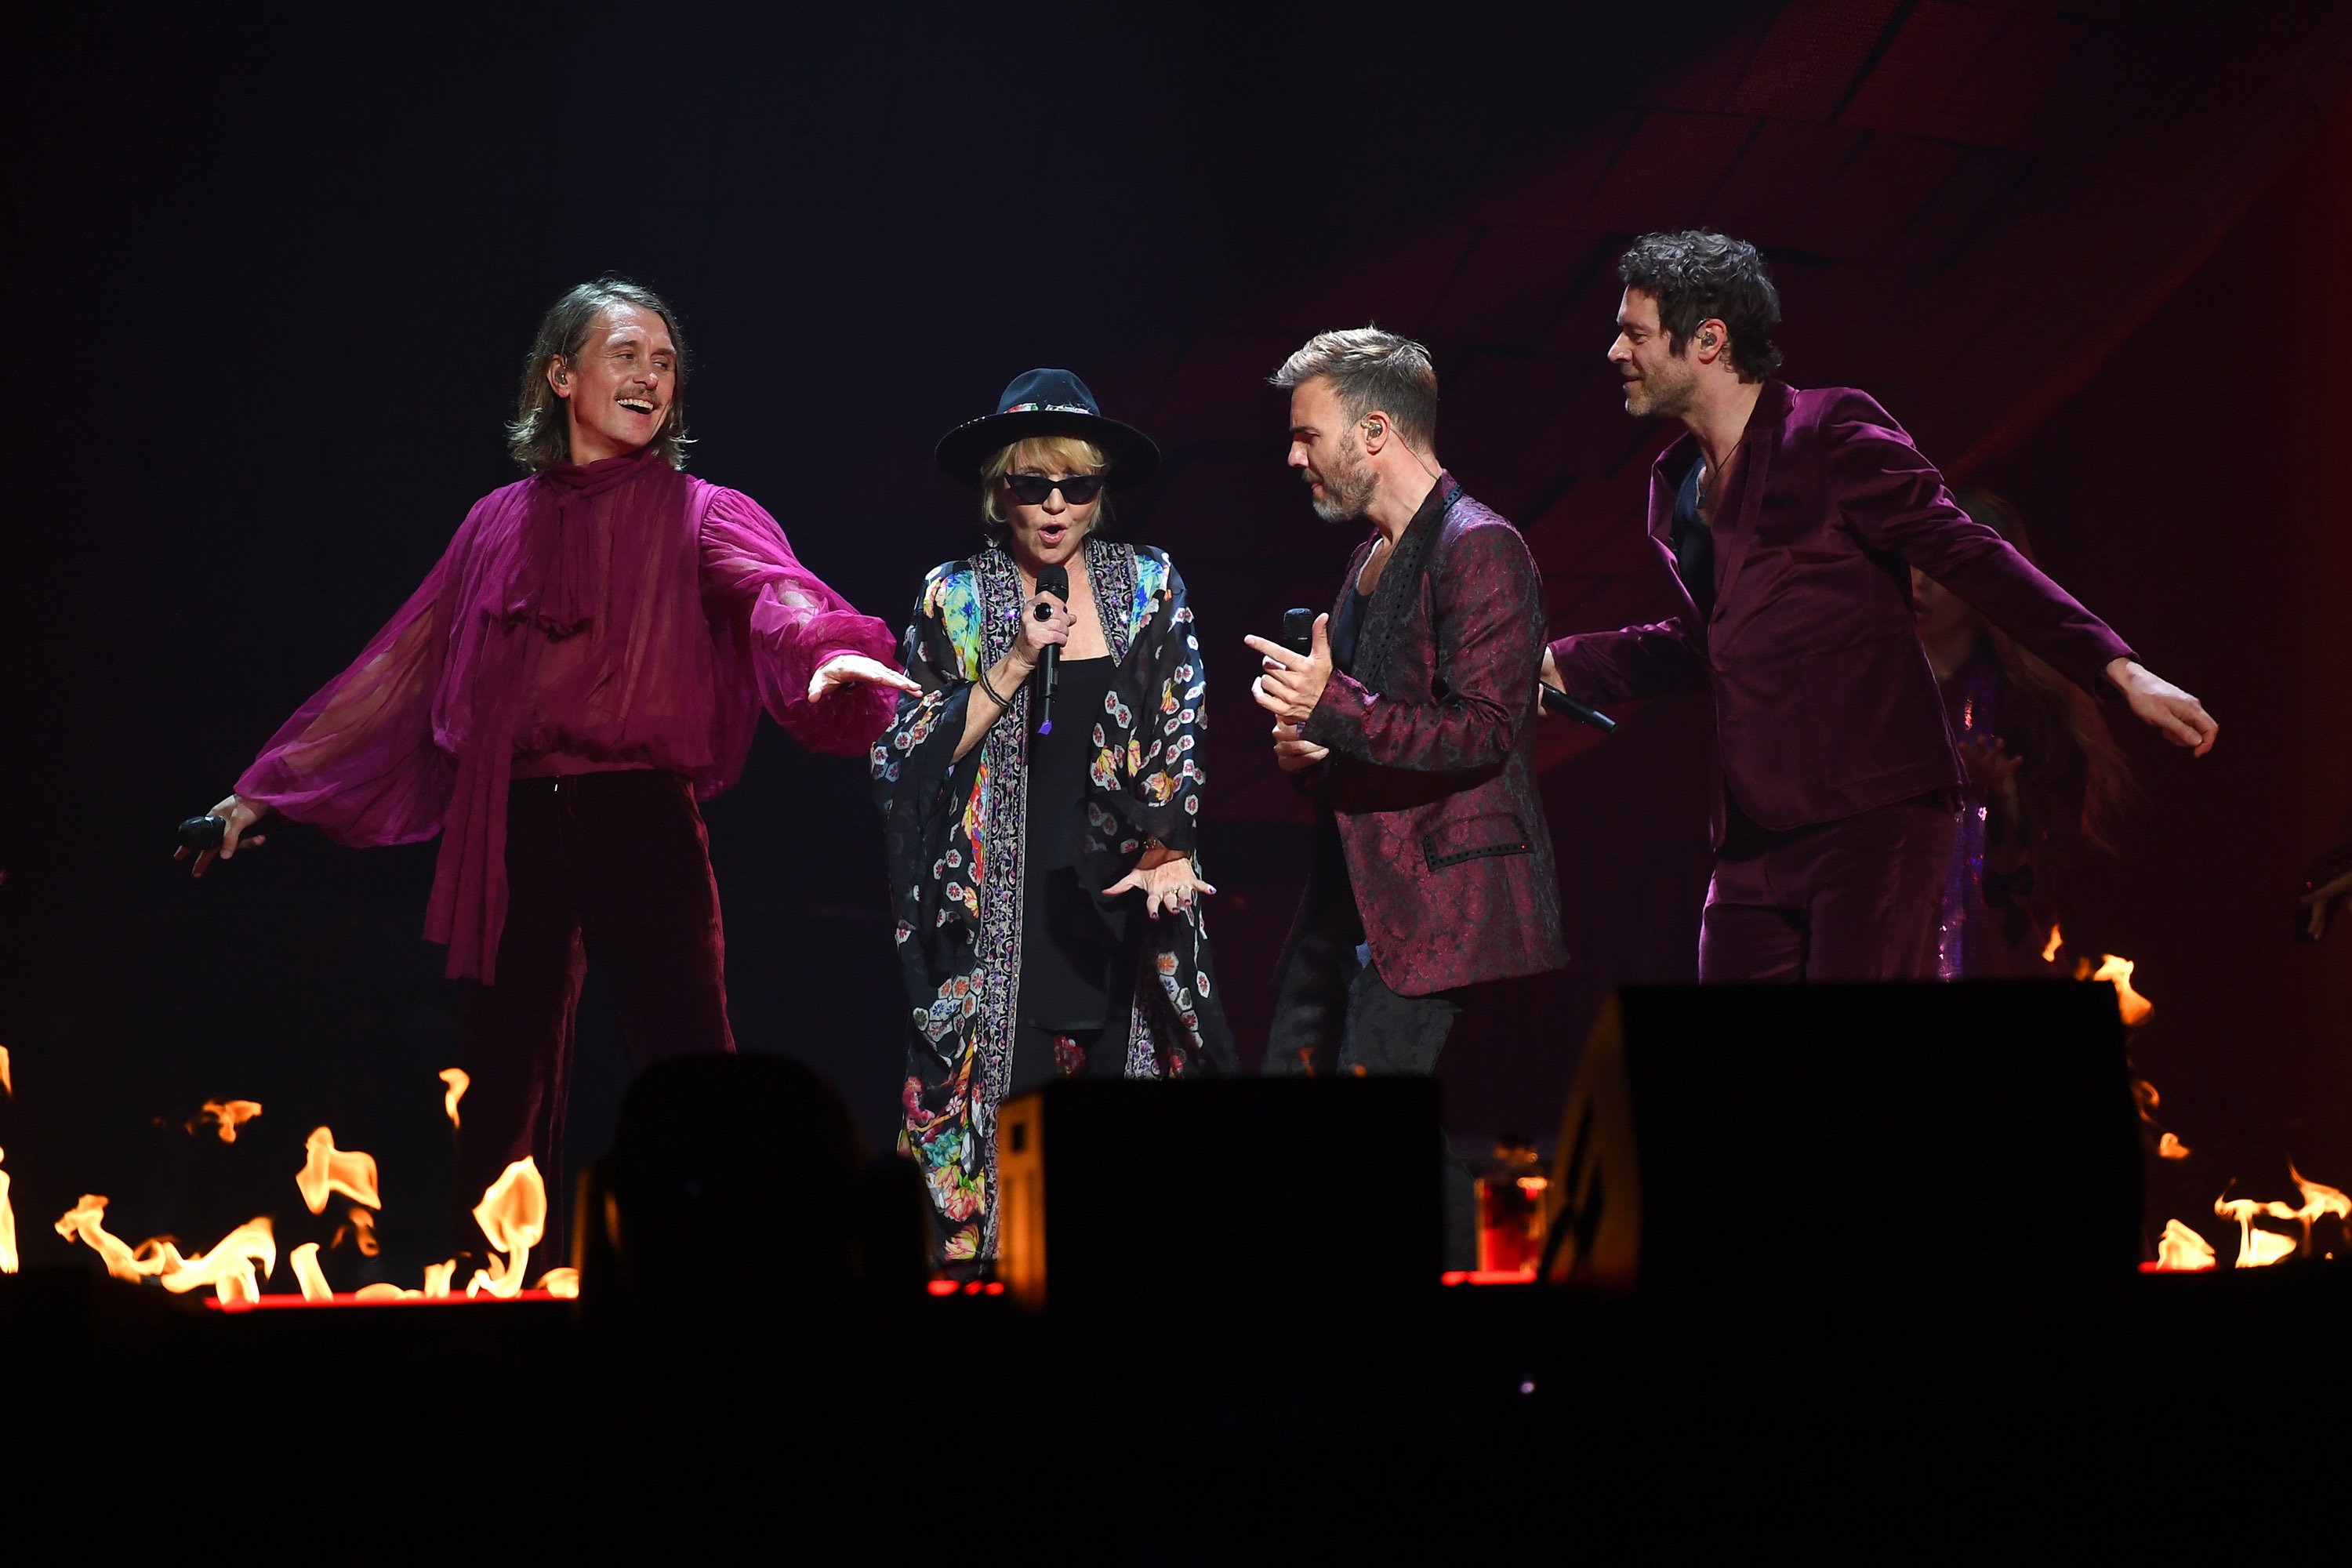 Take That with Lulu on the Greatest Hits tour